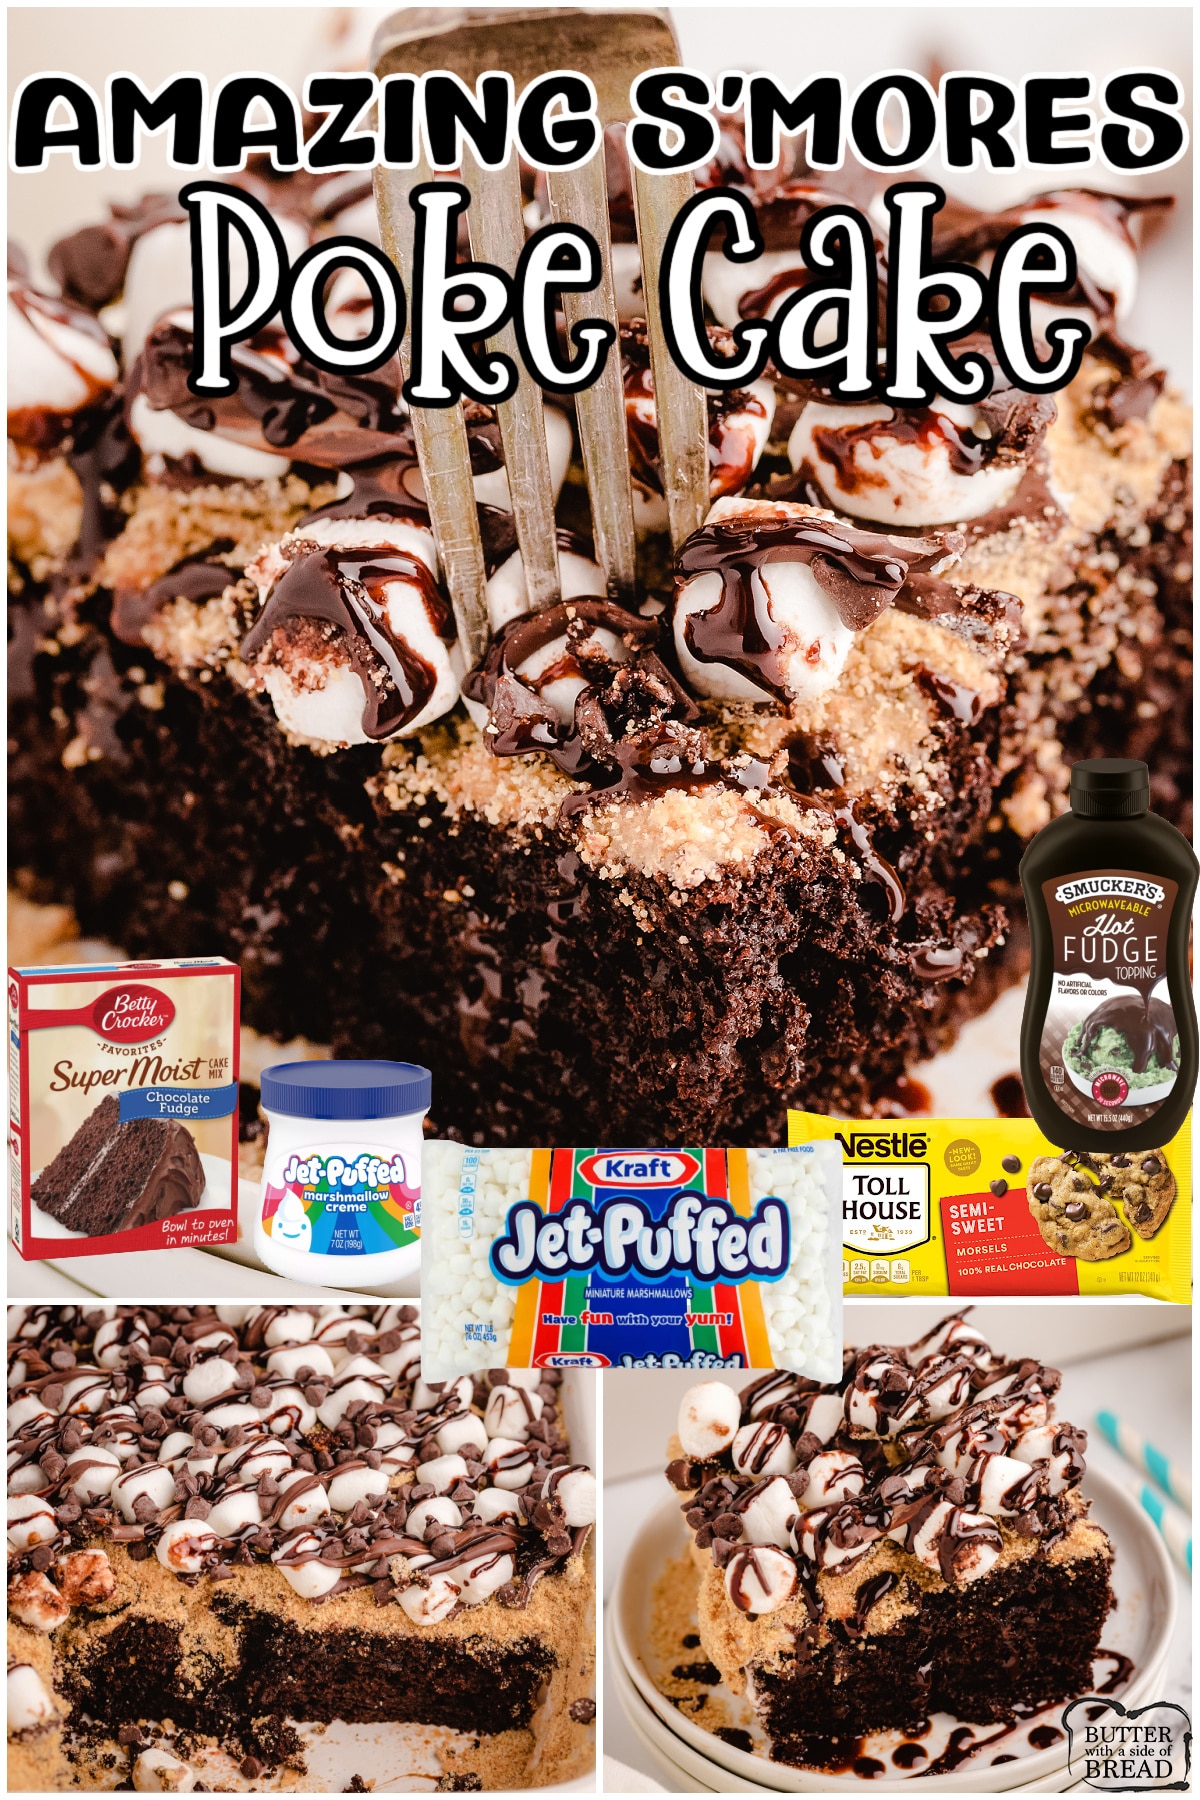 S'mores Poke Cake made with a chocolate cake mix topped with marshmallow cream, graham cracker crumbs, mini marshmallows & chocolate drizzle! S'mores in poke cake form that everyone enjoys!